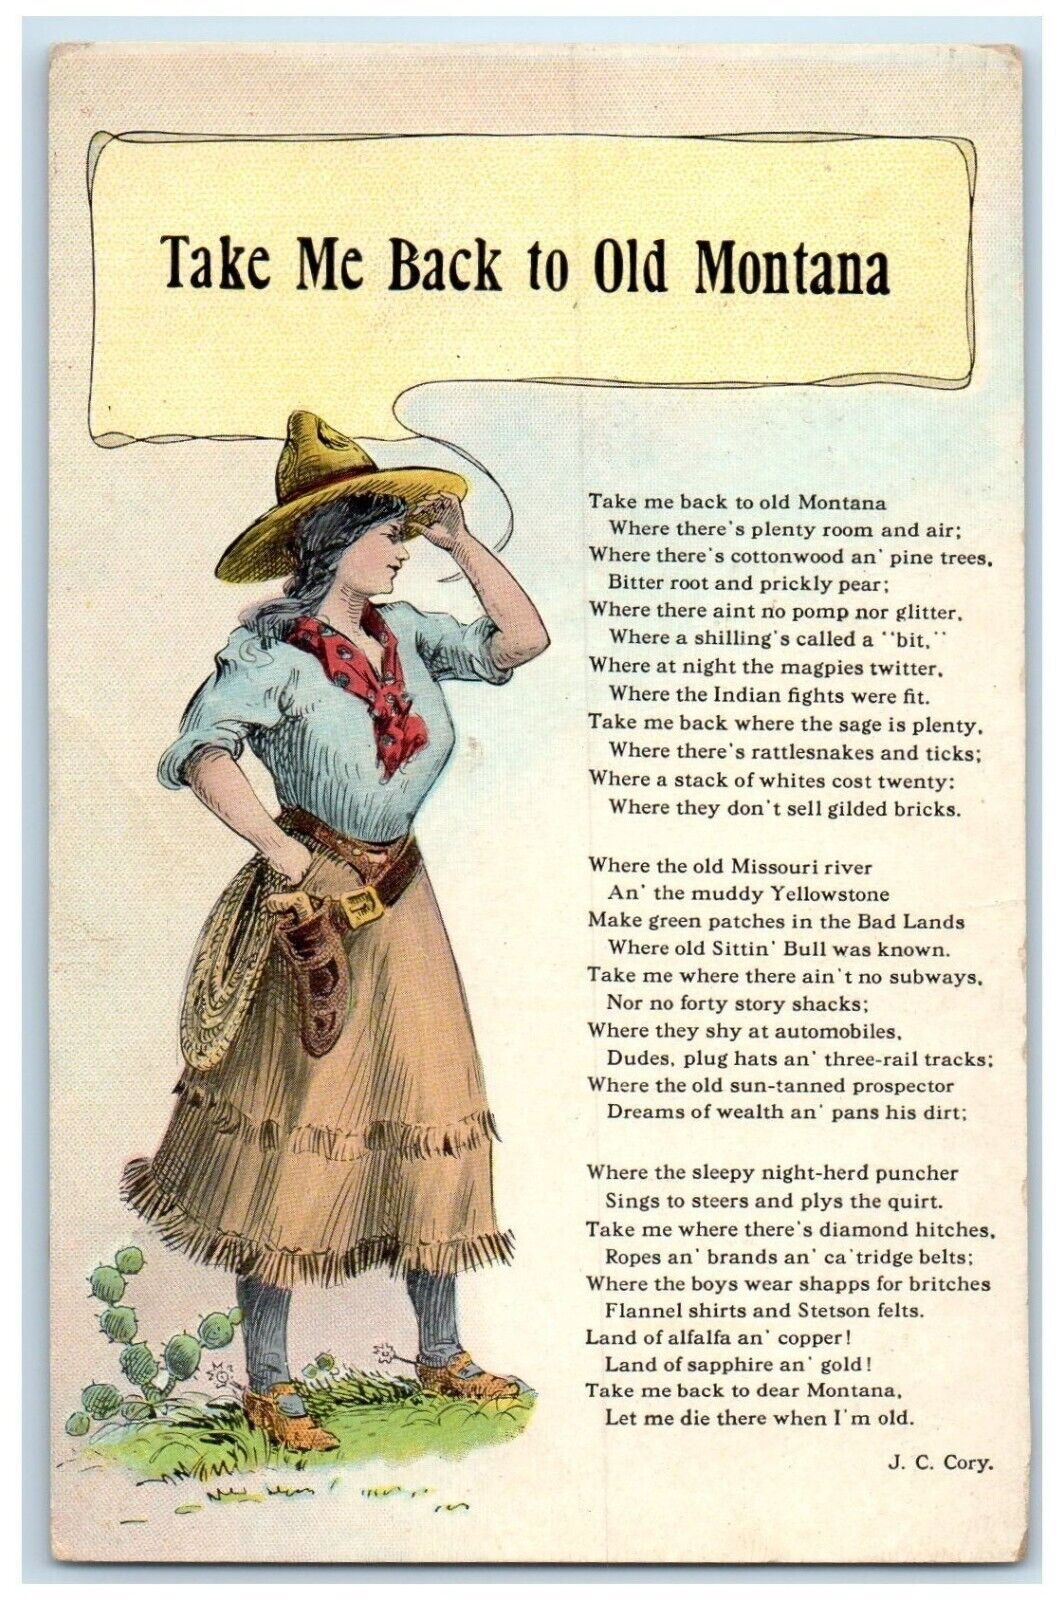 1913 Cowgirl Take Me Back To Old Montana Poem Saco MN Posted Antique Postcard